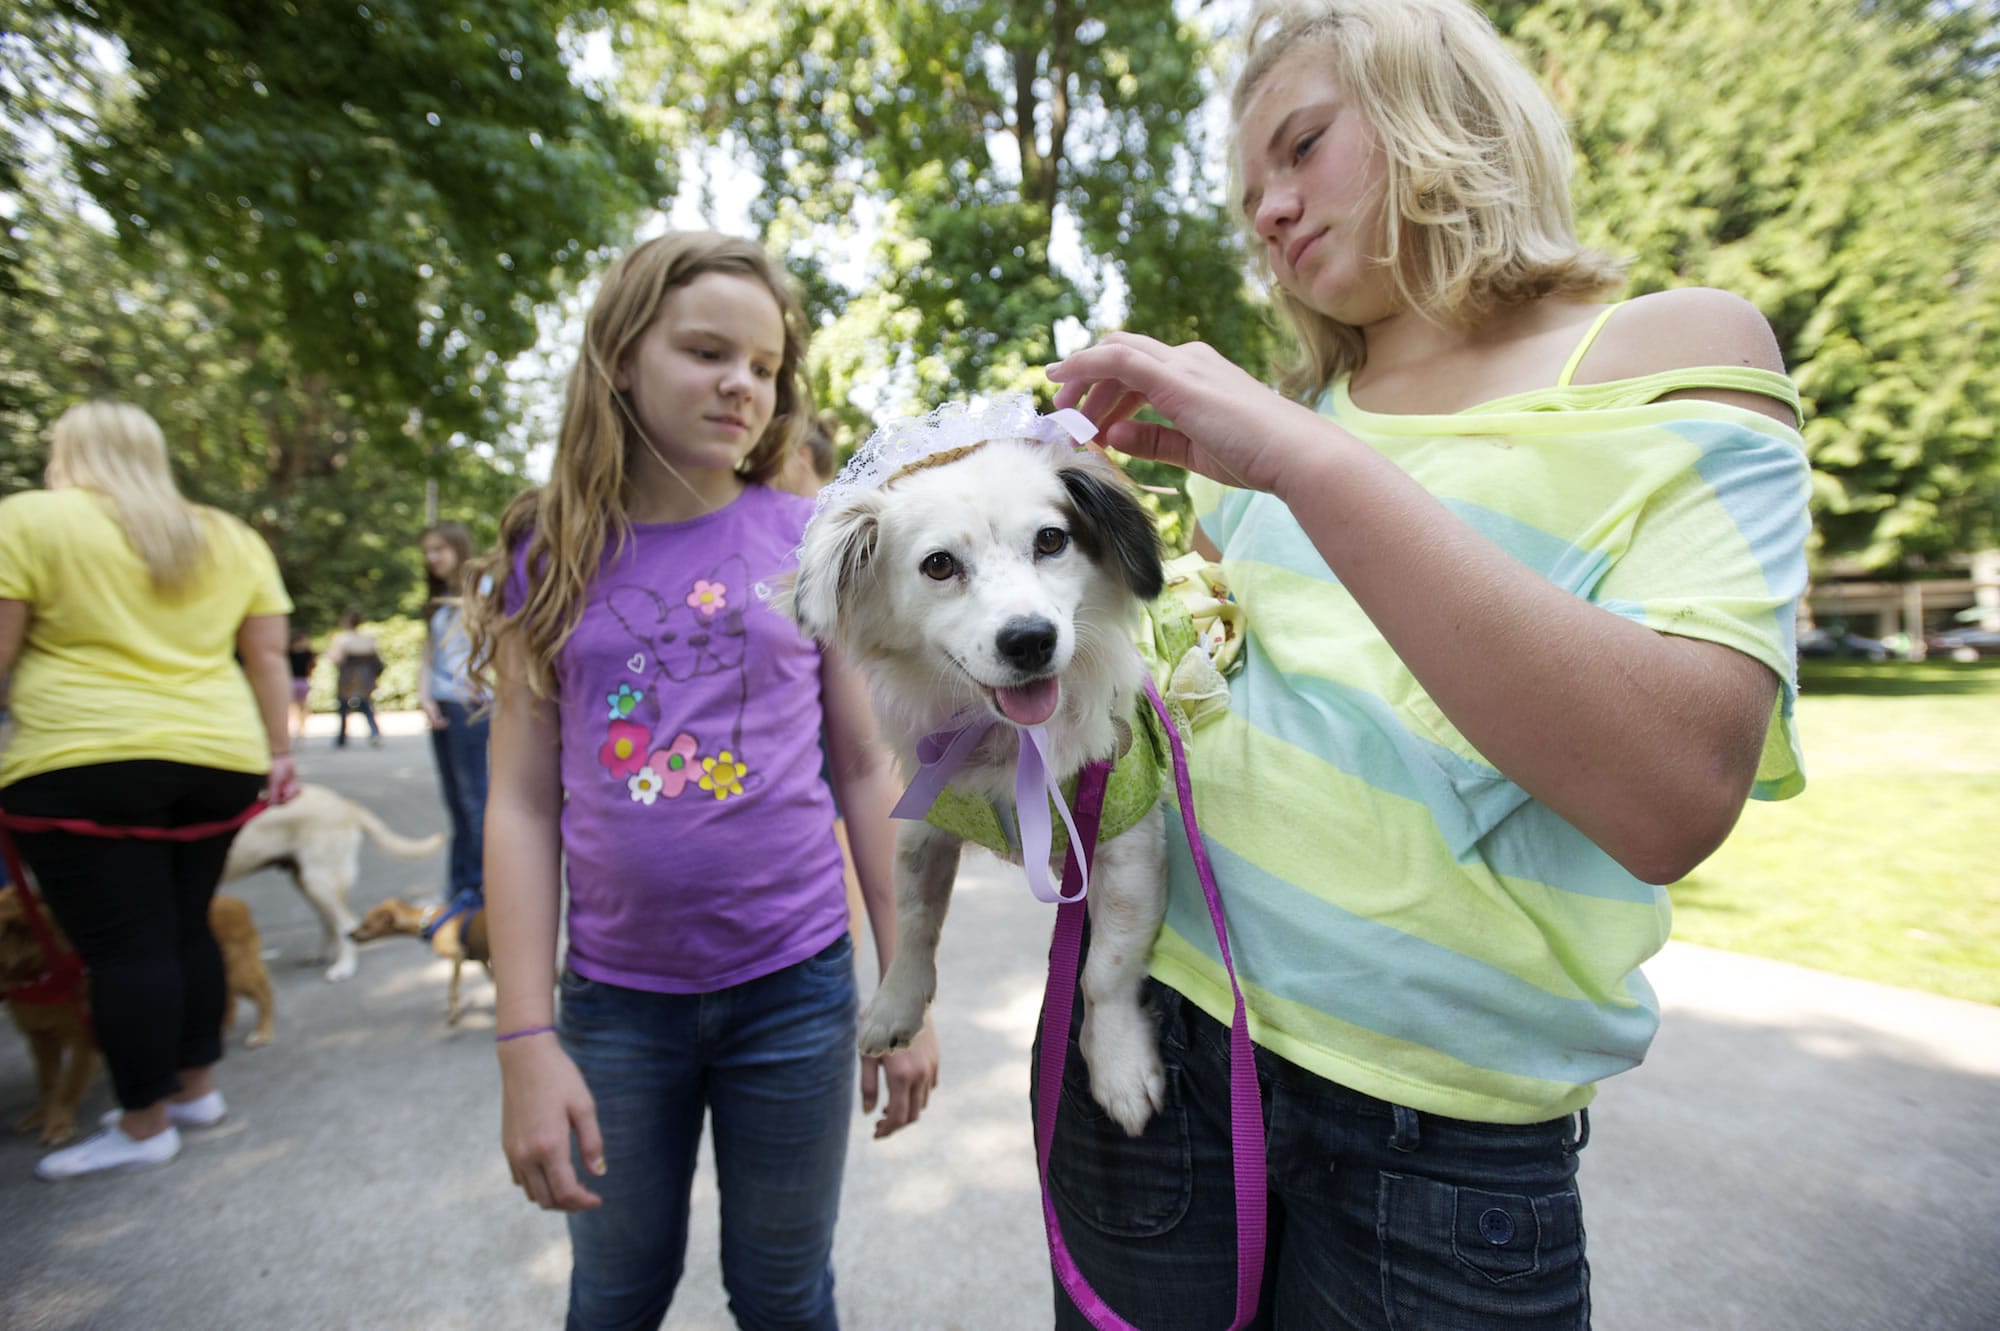 Foster dog Lulu gets gussied up for the dog parade by Madison Postles, 12, right, and her friend Gwyneth Hadfield, 11.